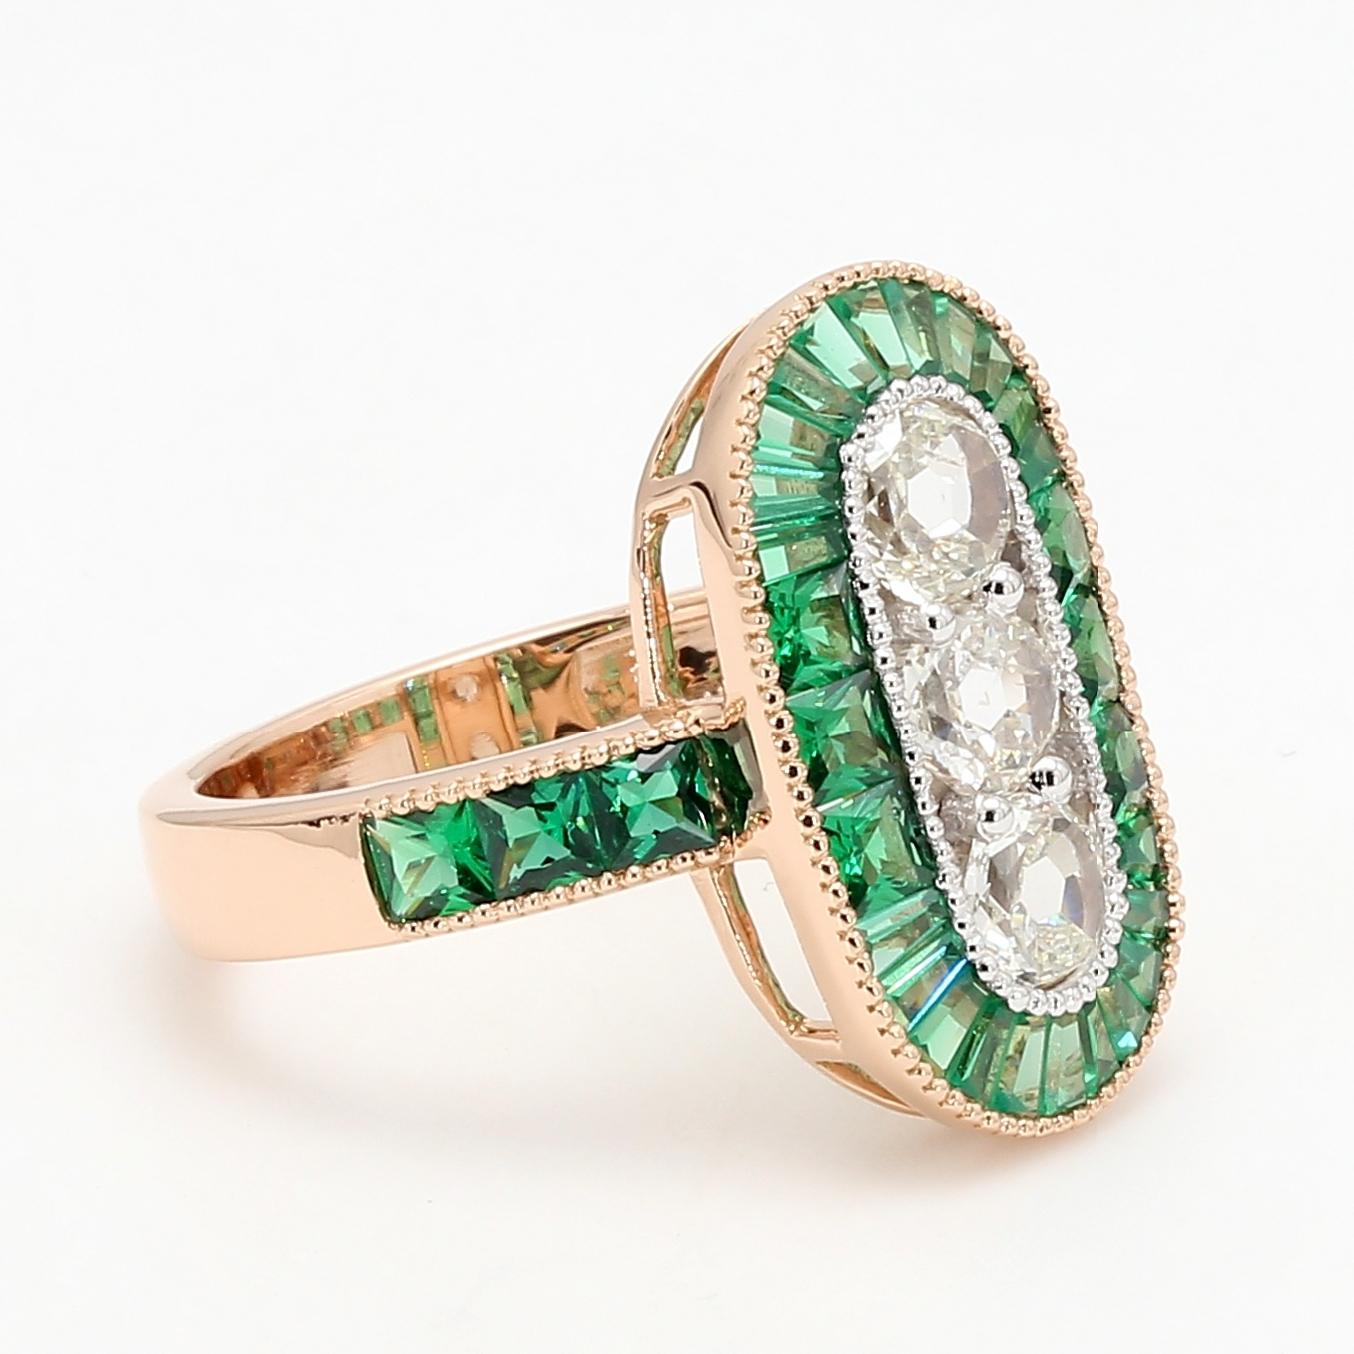 PANIM 18K Rose Gold Old Mine Cut Diamond & Emerald Ring

A super 18 karat yellow gold, three stone diamond & emerald ring that displays three bright Old Mine Cut diamonds , with a total estimated 1 cts of white diamonds & 1.40 cts of calibrated